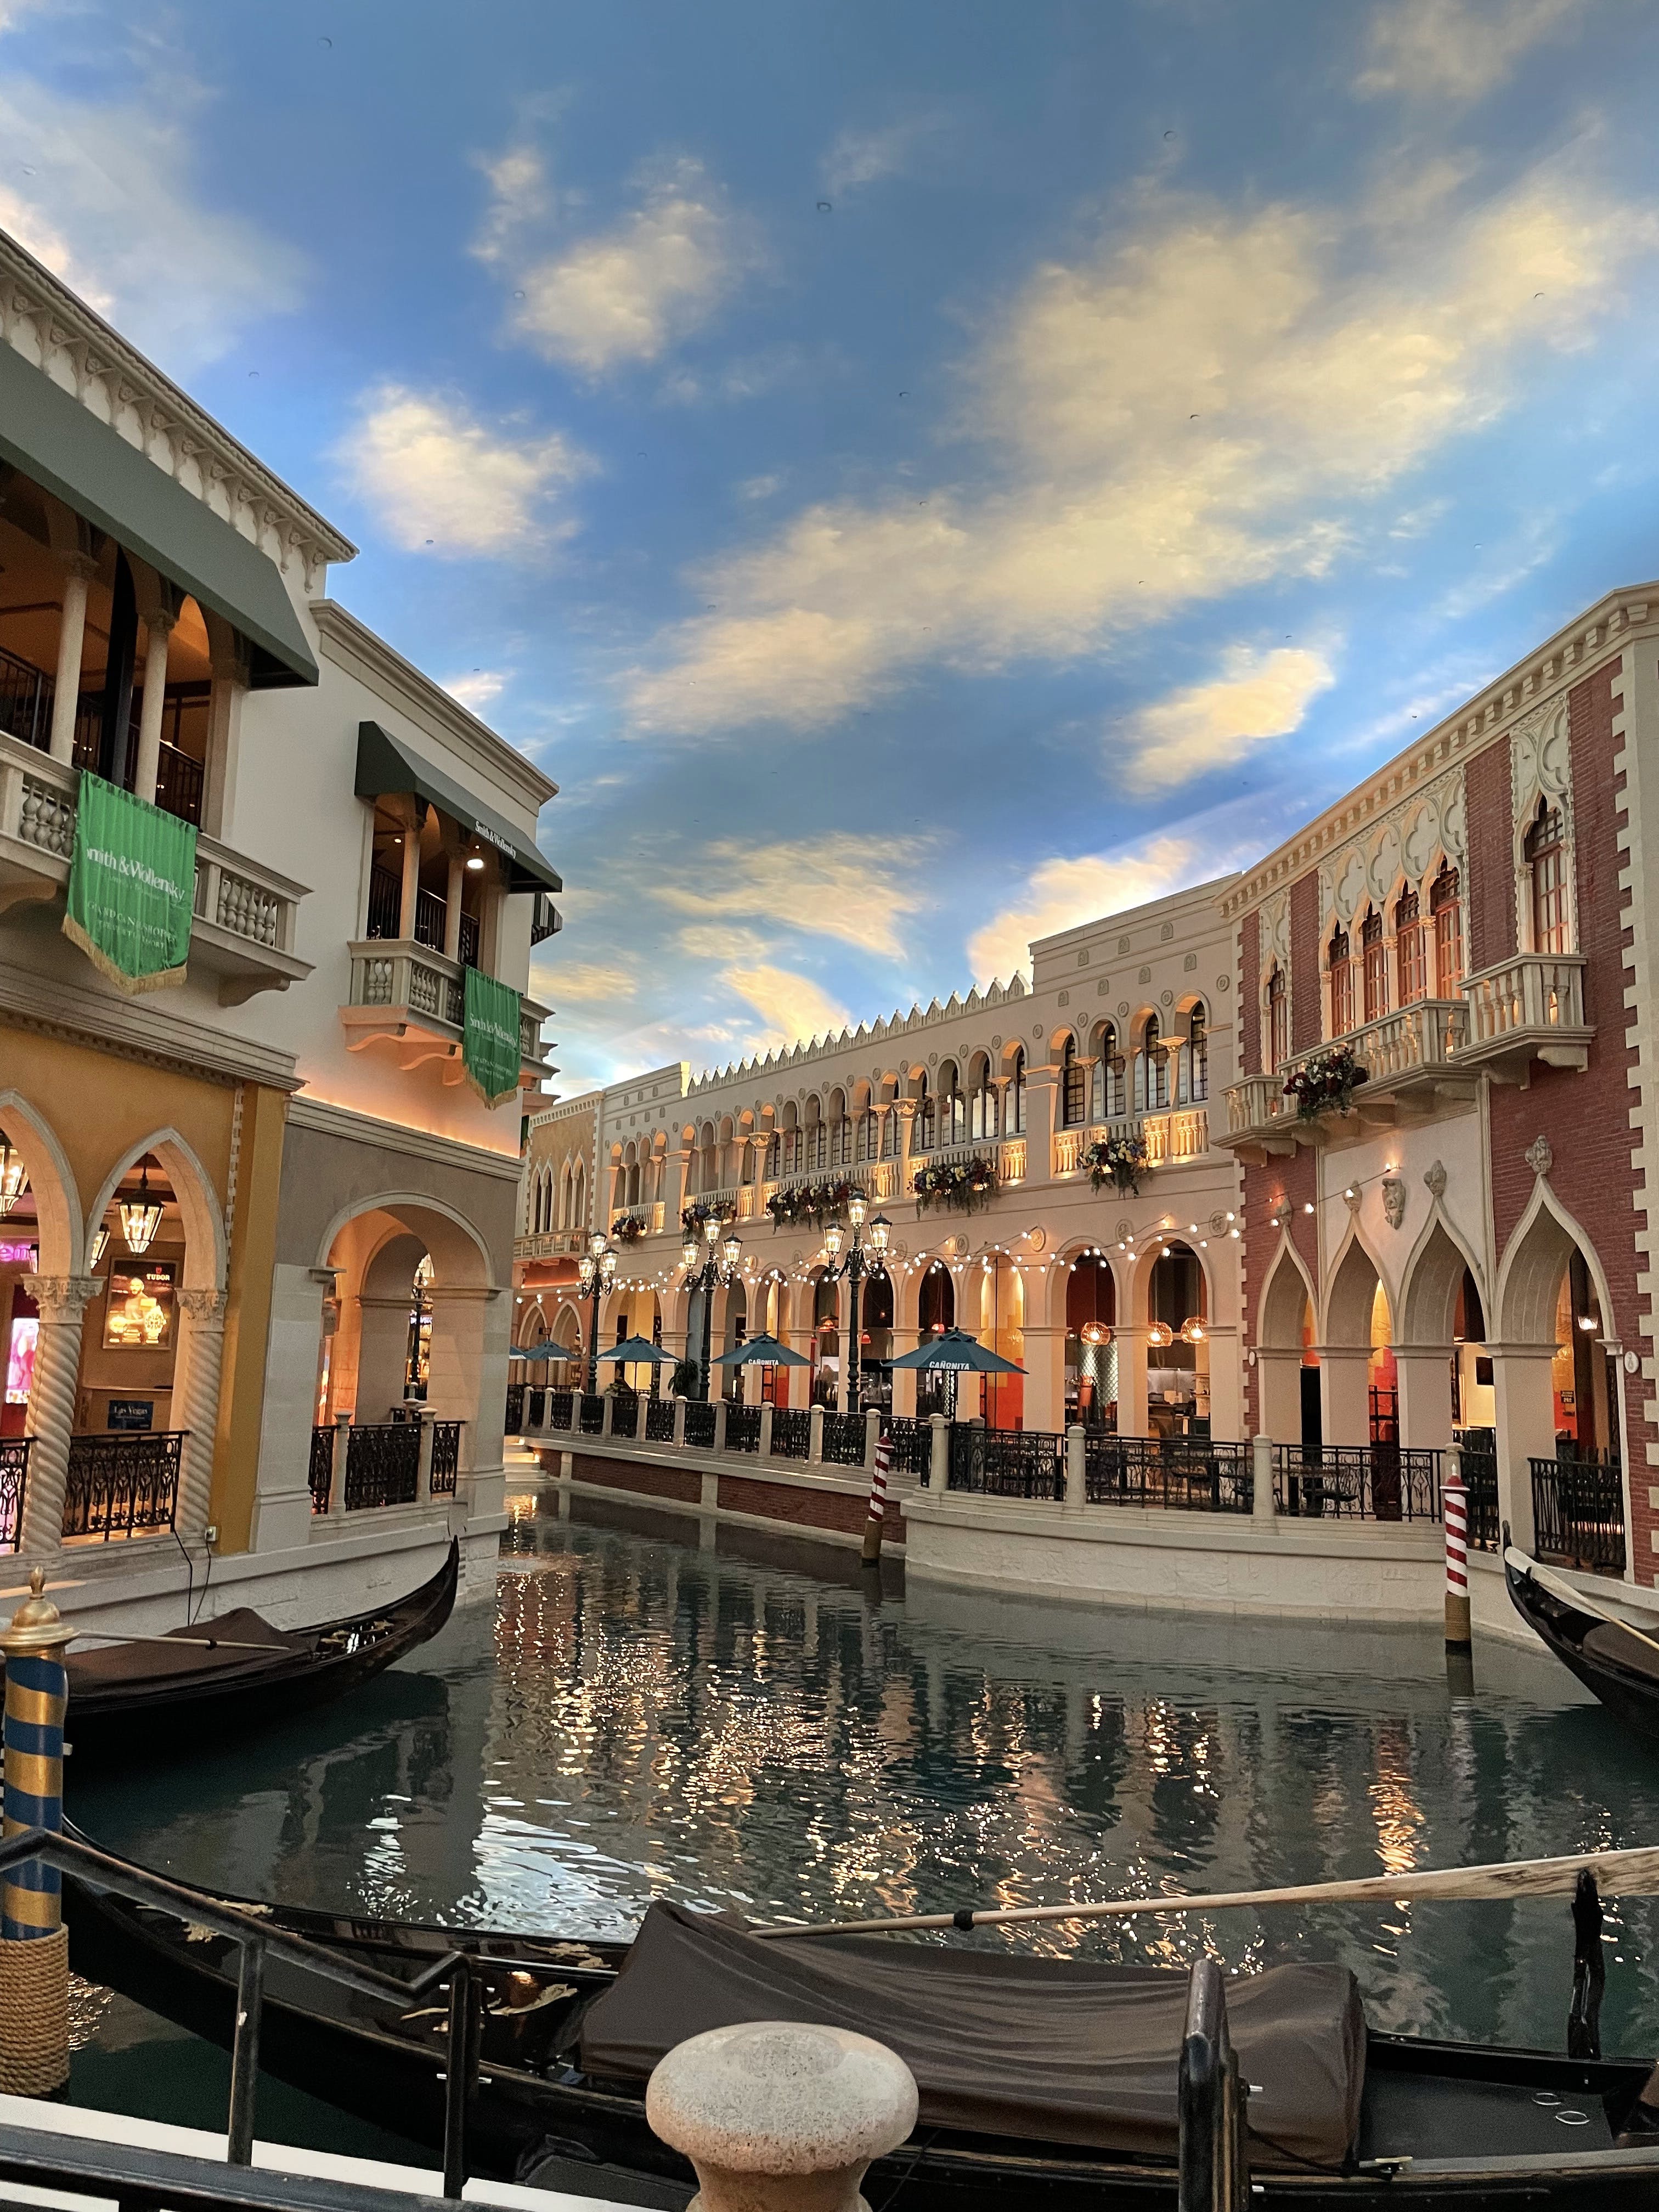 The blue sky ceiling, Renaissance architecture, and river (with real rowers!) at The Venetian hotel and casino.